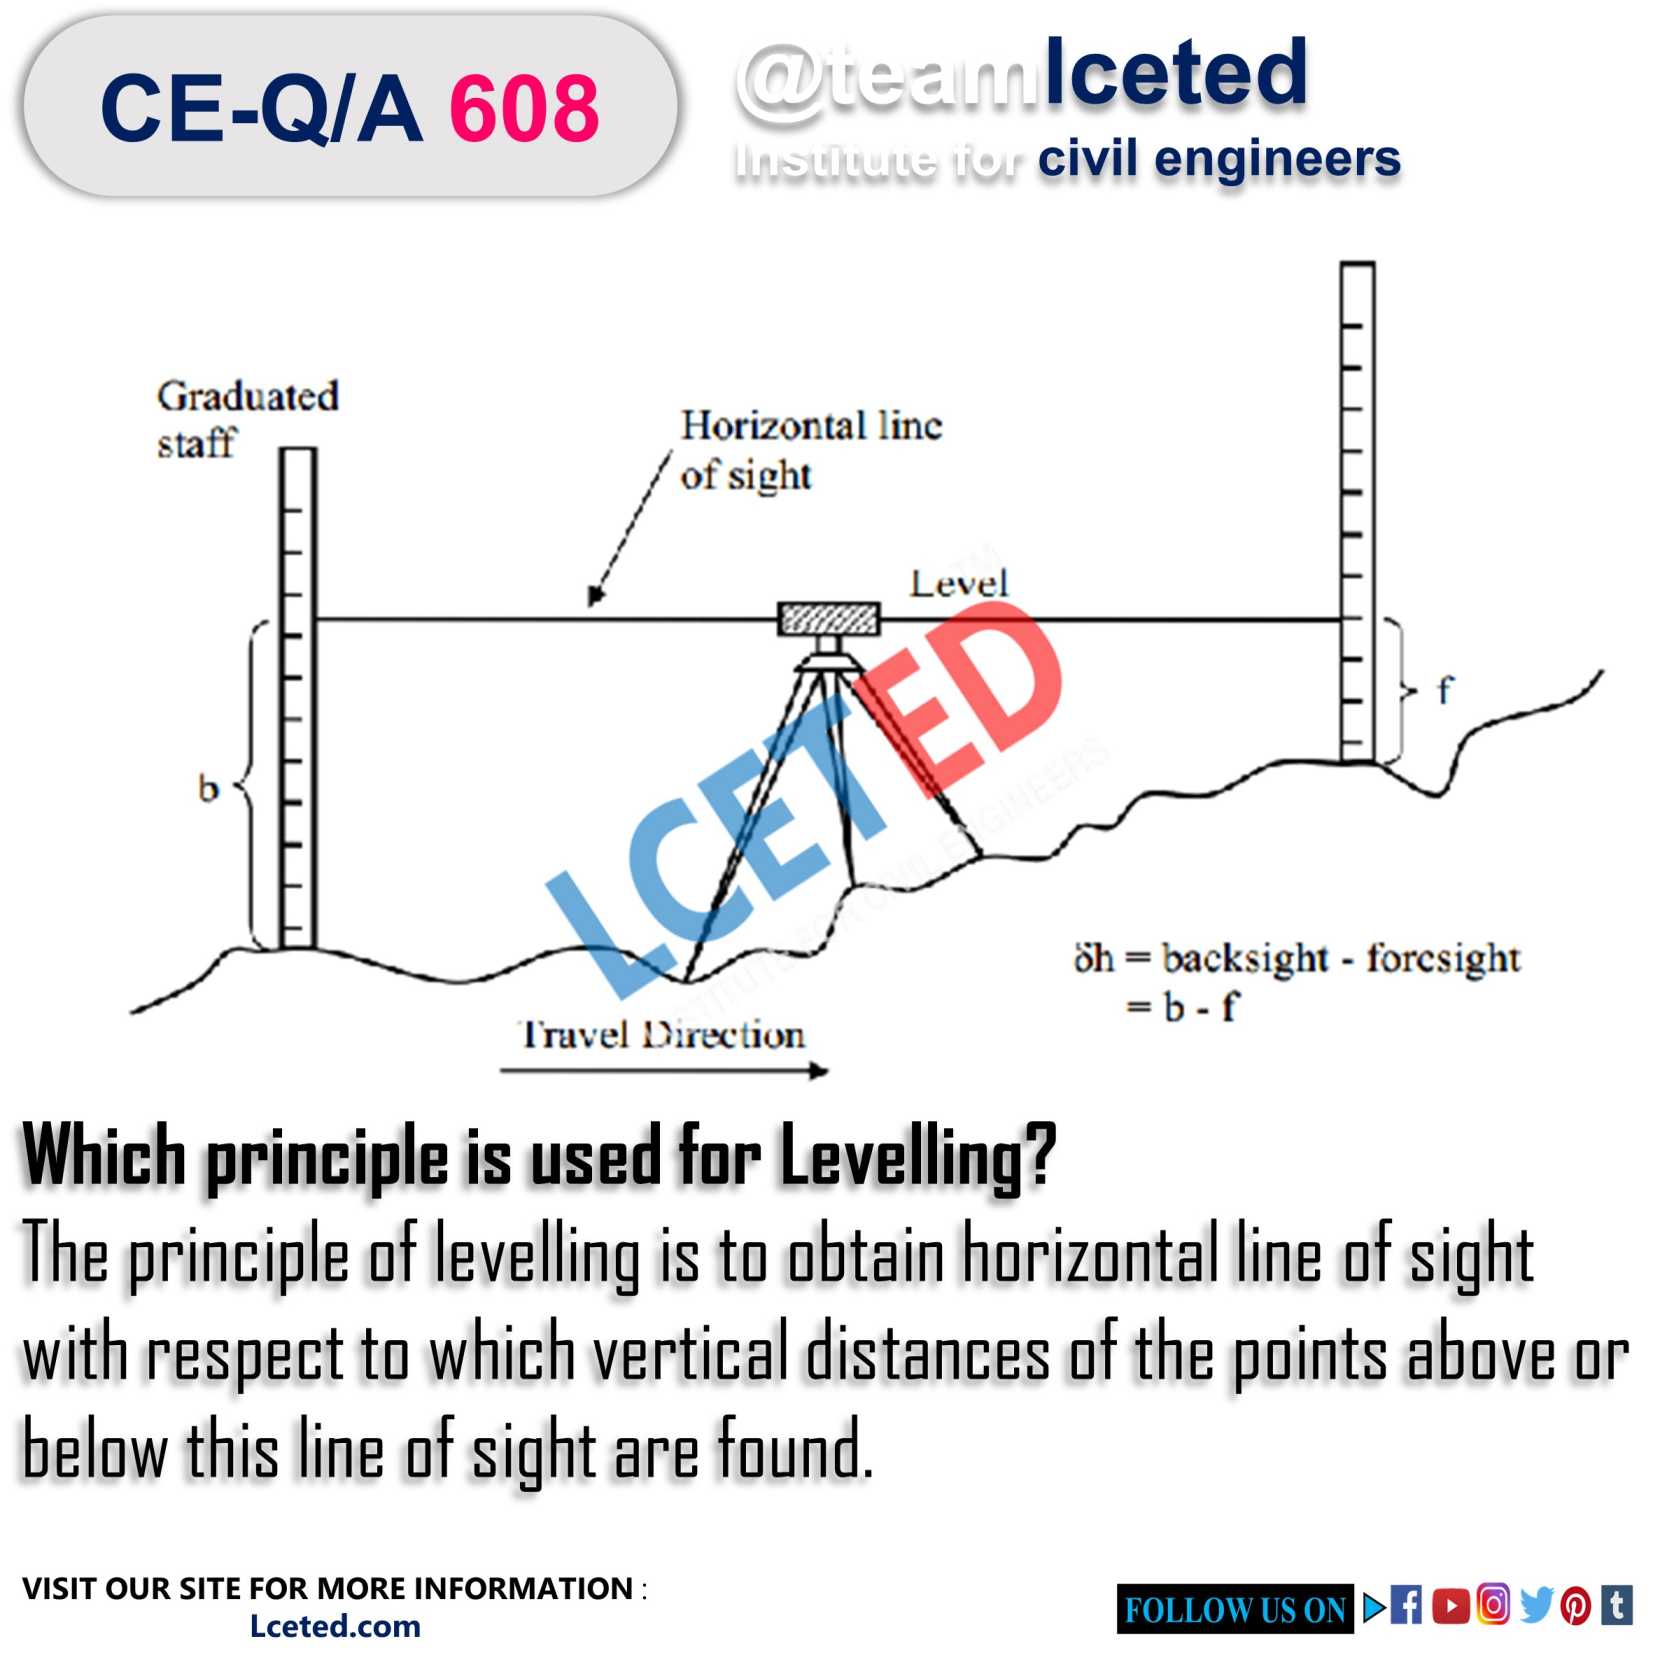 principle is used for Levelling